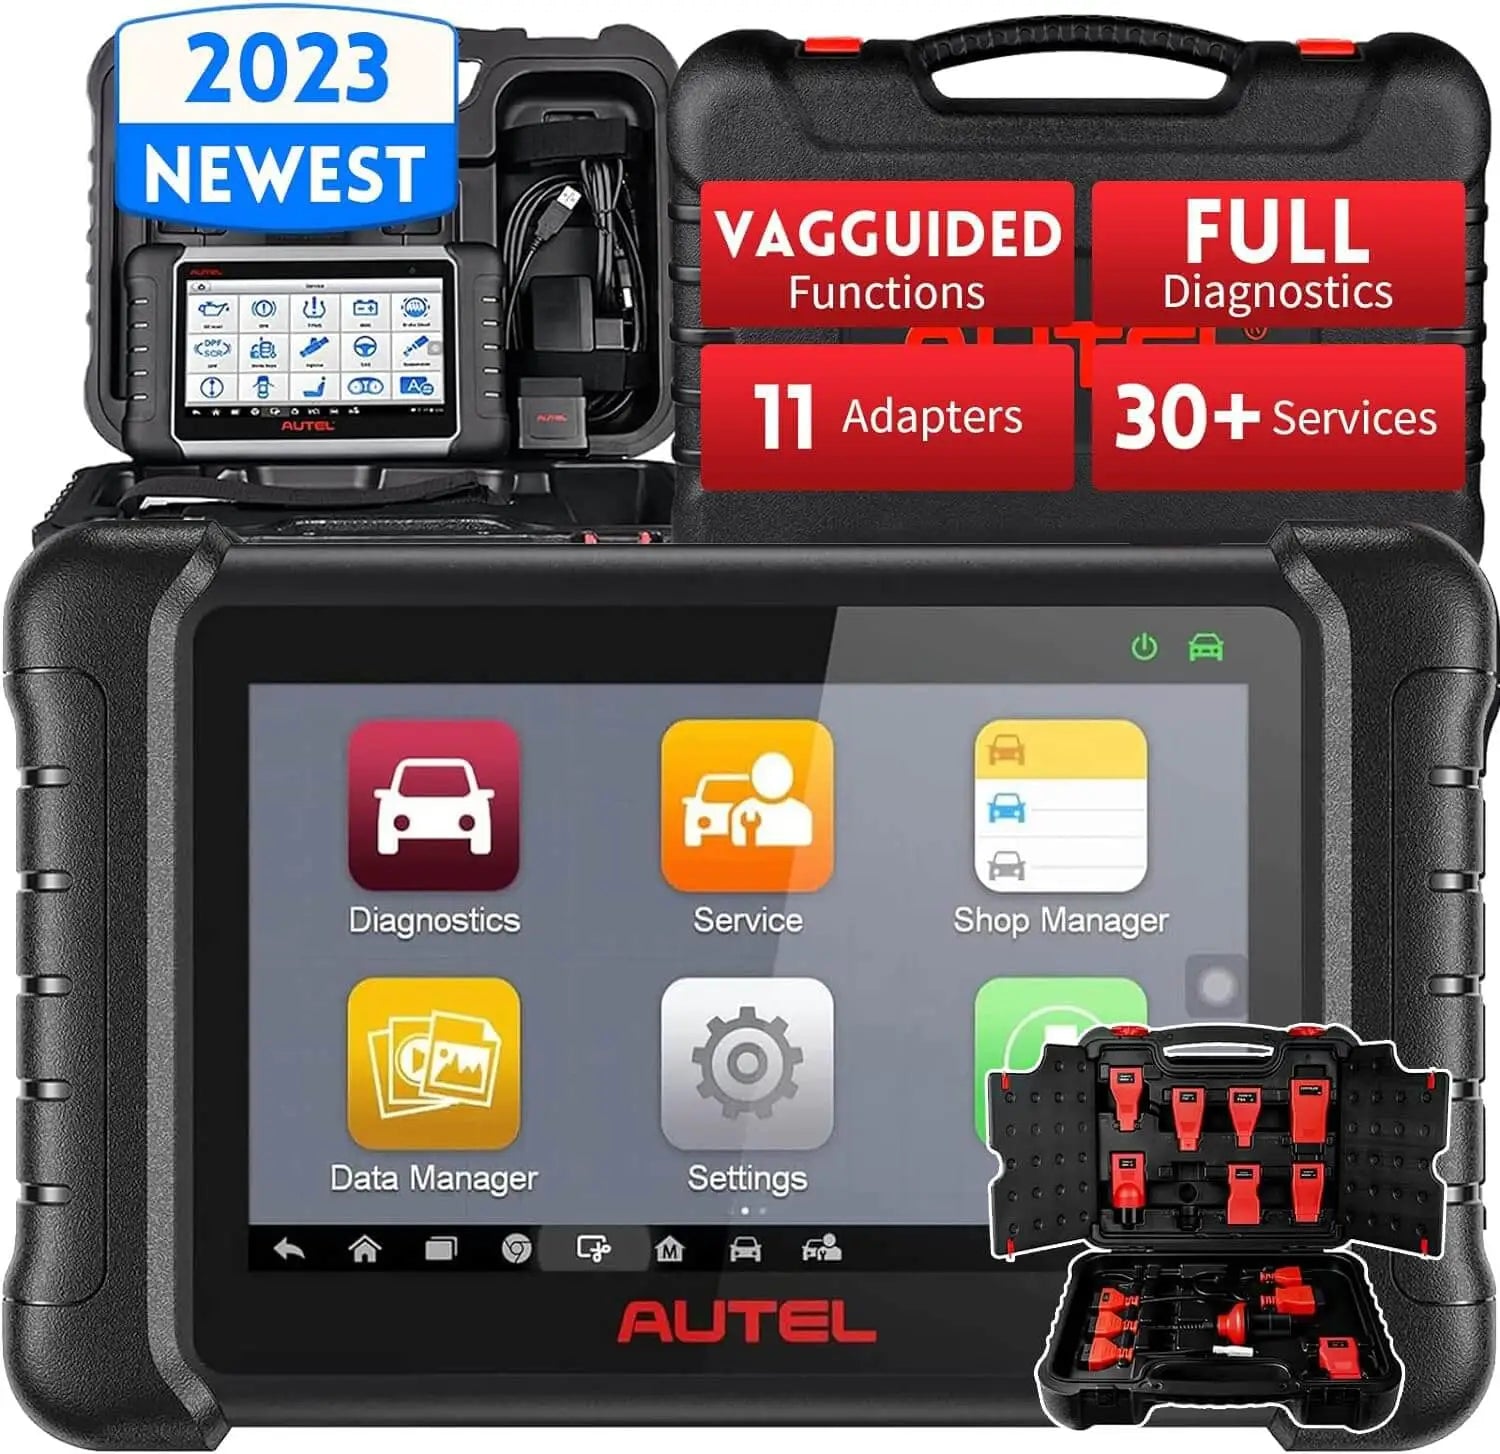 Autel MaxiDAS DS808K Bi-Directional Control Diagnostic Scan Tool [2022 Newest], Same as MS906, Support MV108/MV105 OE-Level All Systems Diagnosis, Oil Reset, ABS Bleed, SRS, SAS